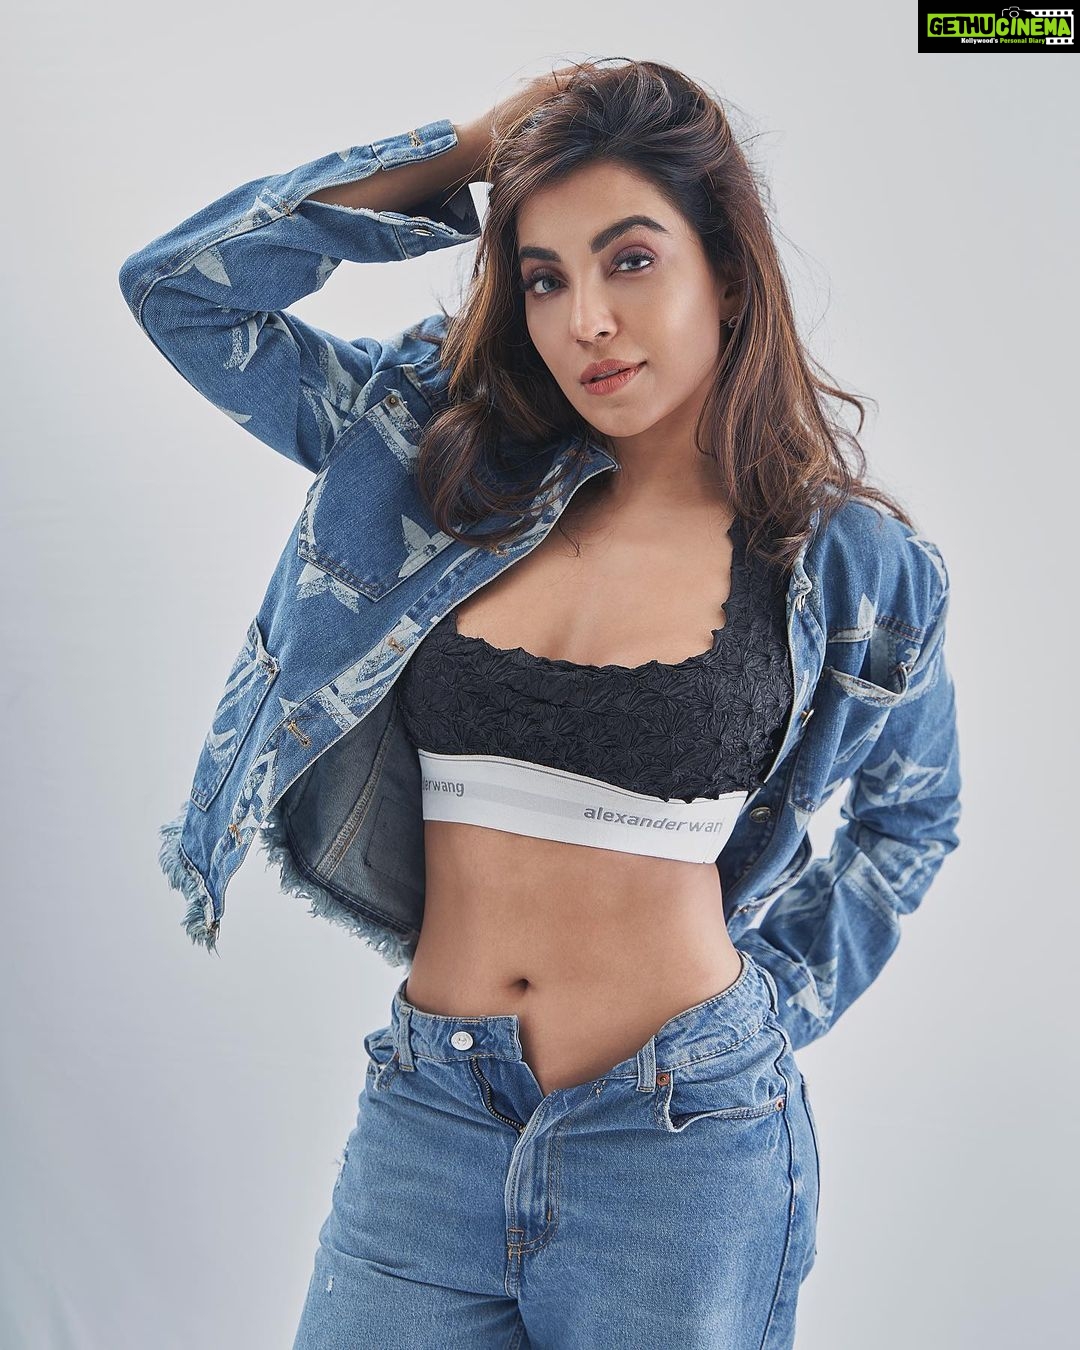 Parvatii Nair - 84.7K Likes - Most Liked Instagram Photos